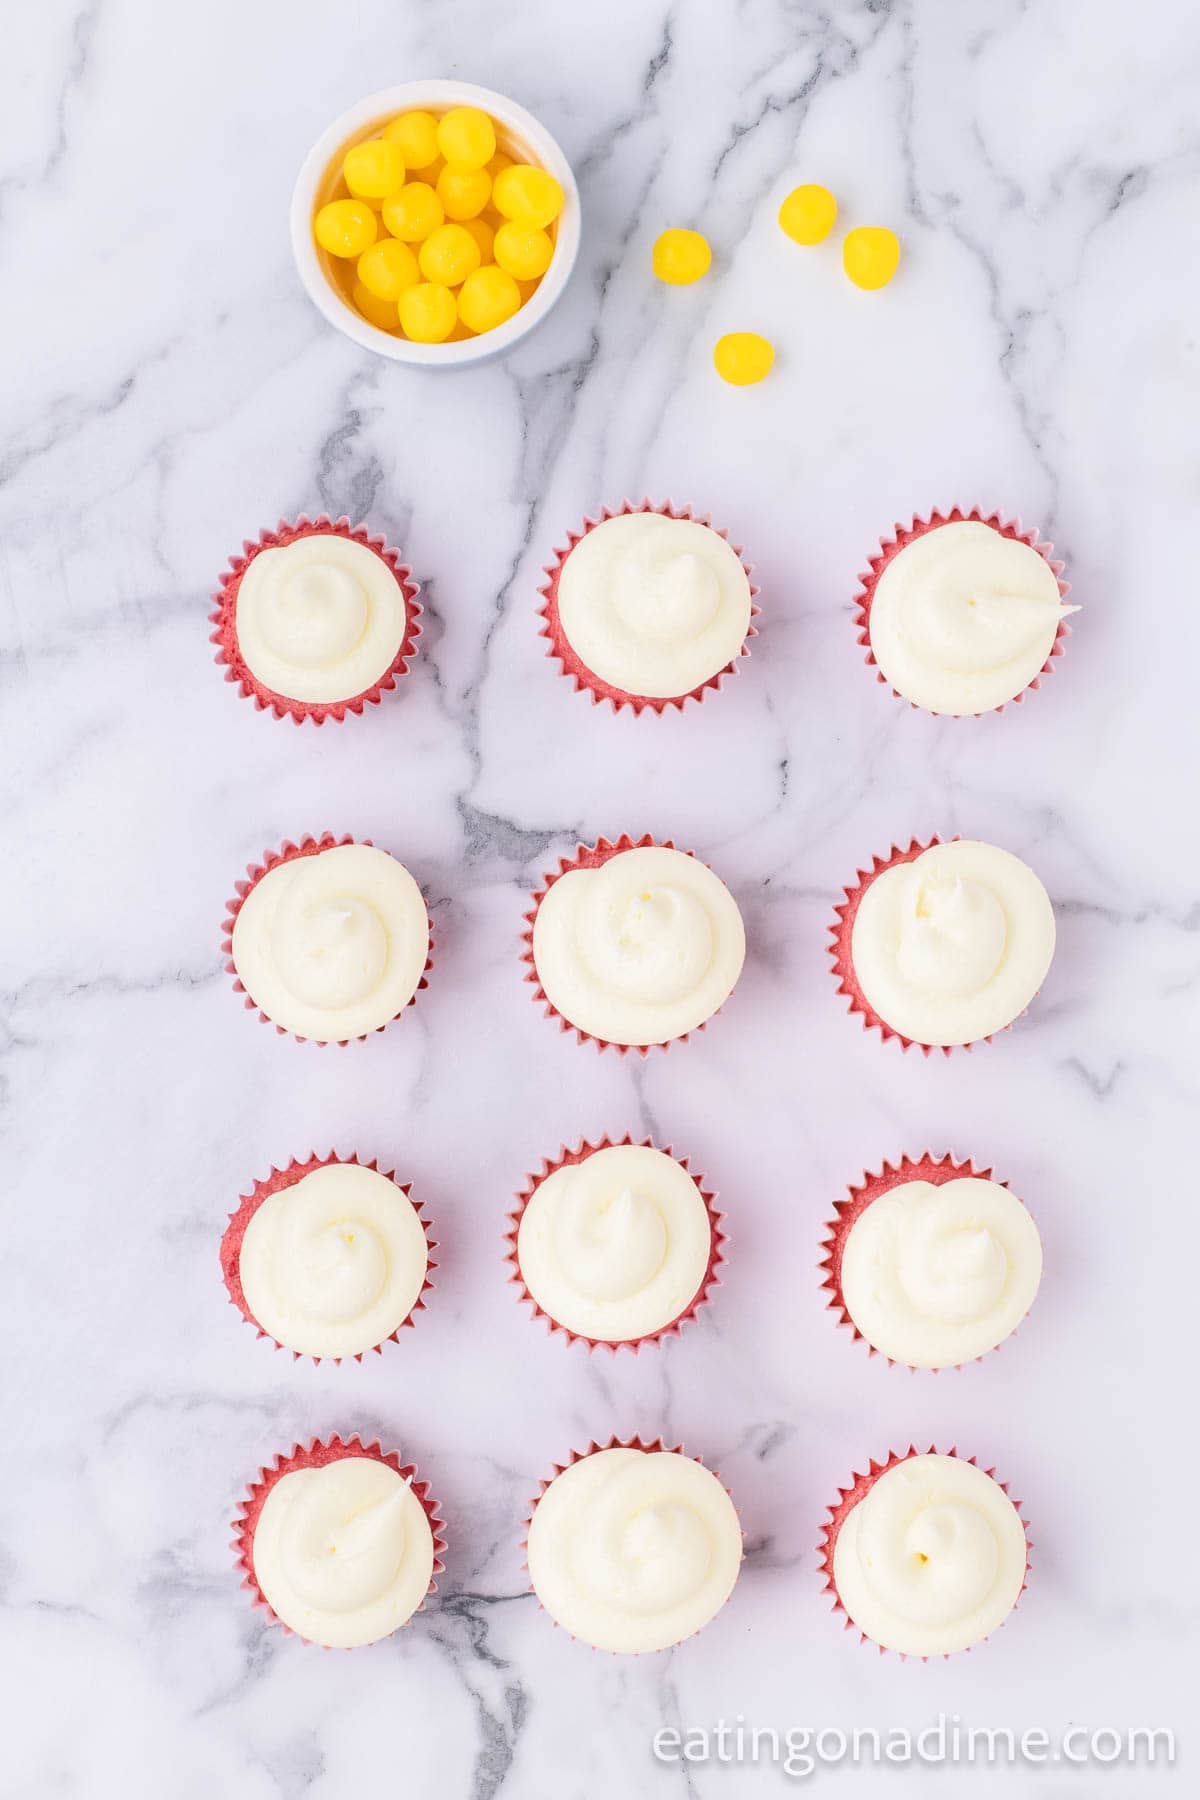 Frost the cupcakes with a piping bag to create a swirl motion